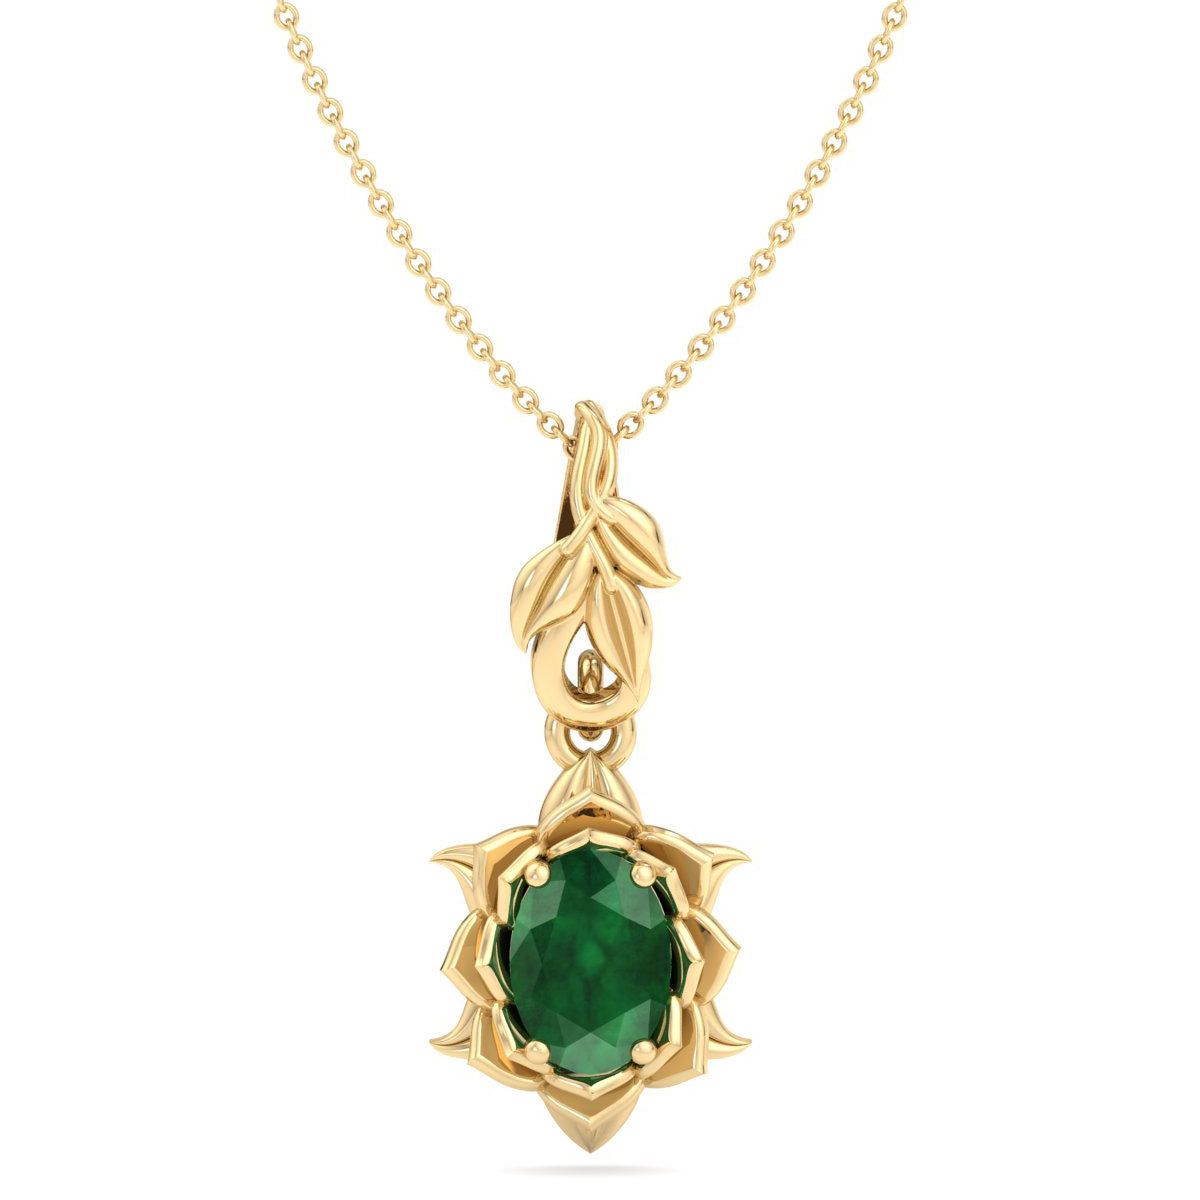 Sselects 3/4 Carat Oval Shape Emerald Necklaces With Ornate Vine Design In 14 Karat Yellow Chain In Gold